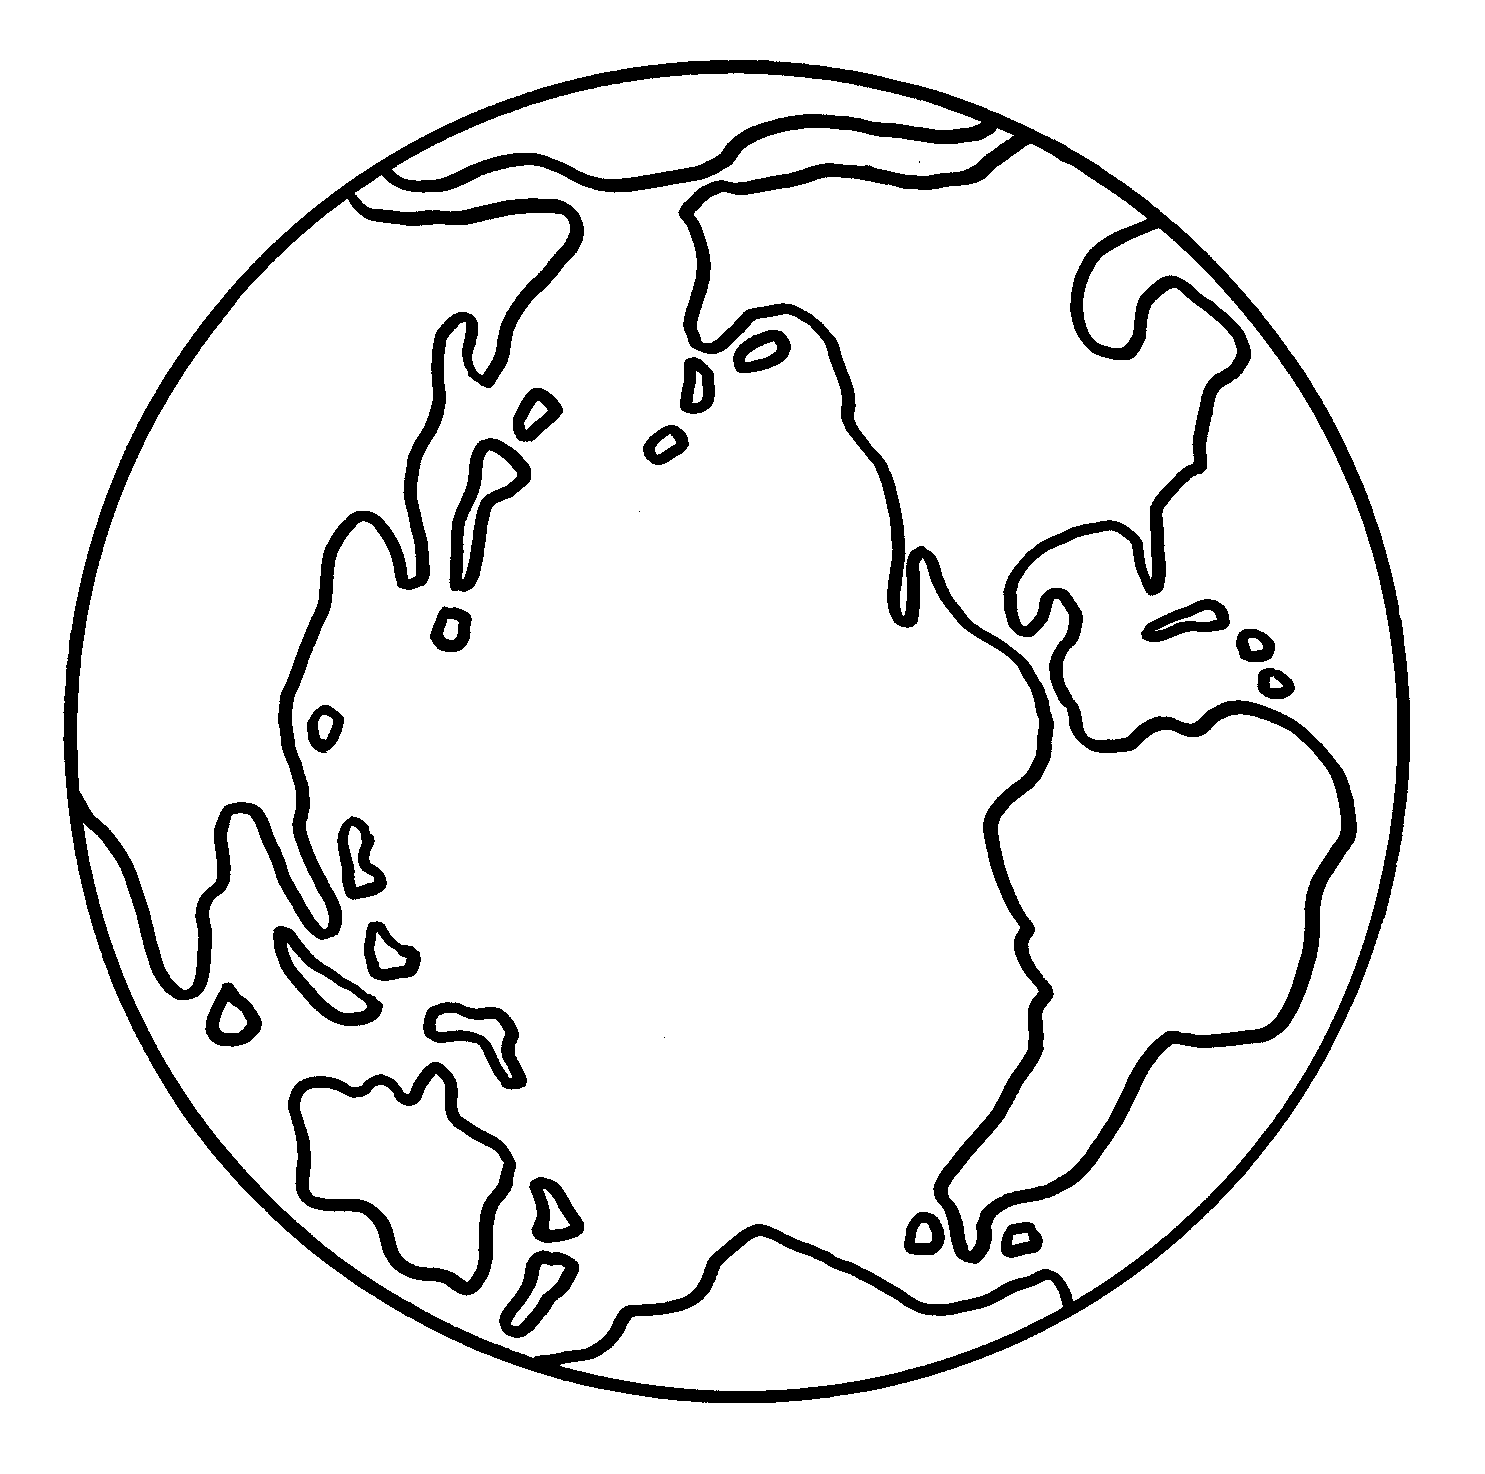 Earth globe clipart black and white free images 3